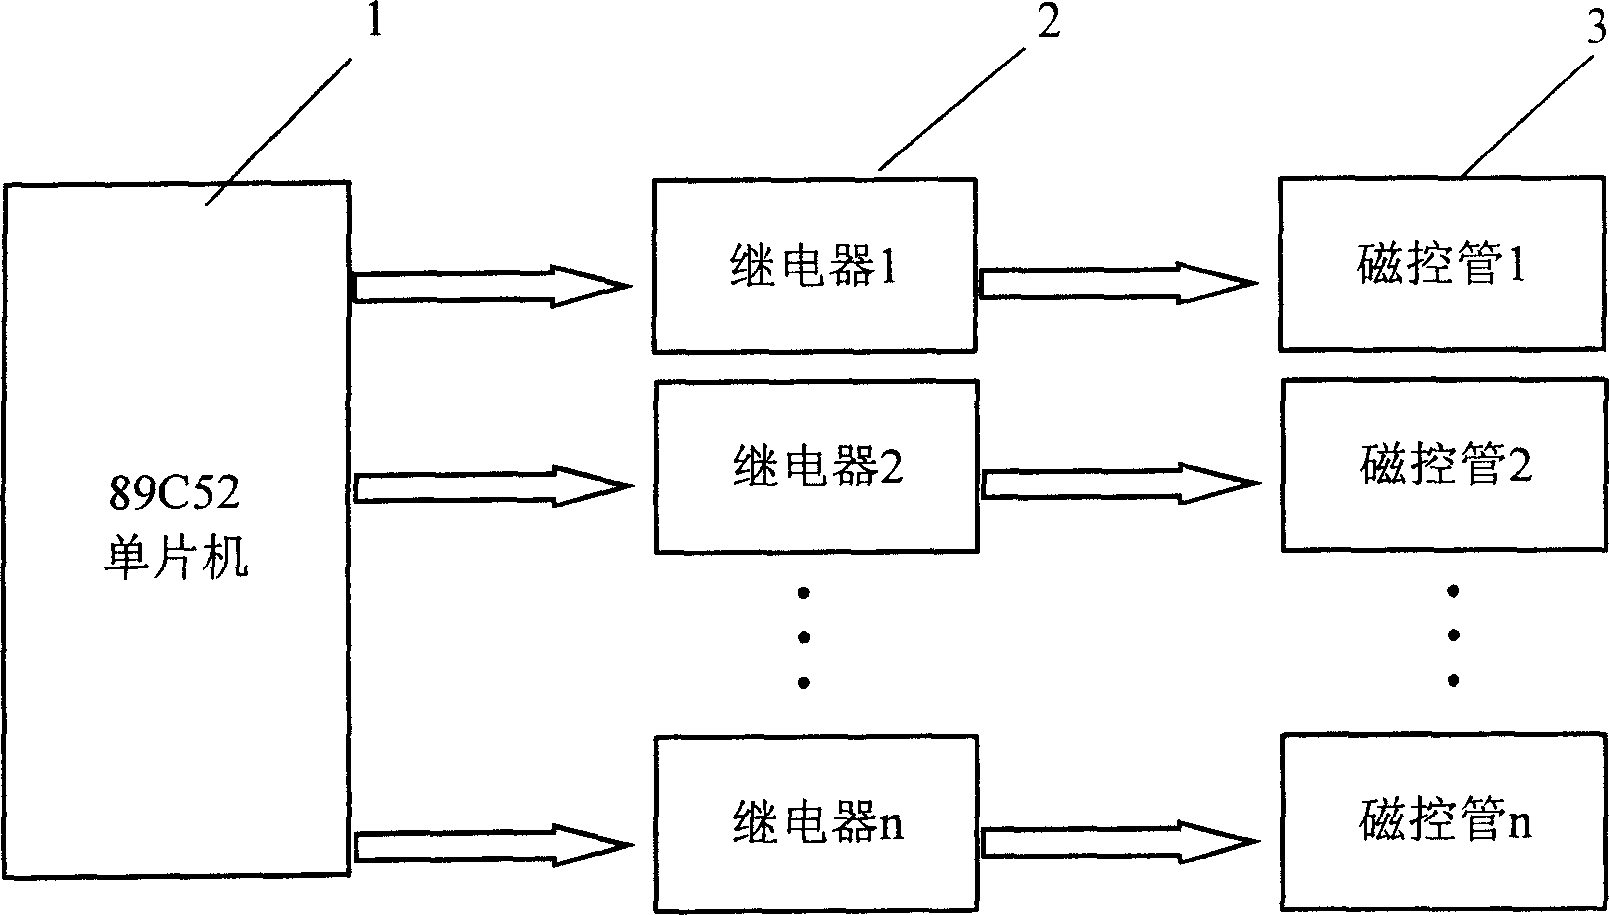 Positive power control method for multiple magnetic-control tube microwave chemical reactor